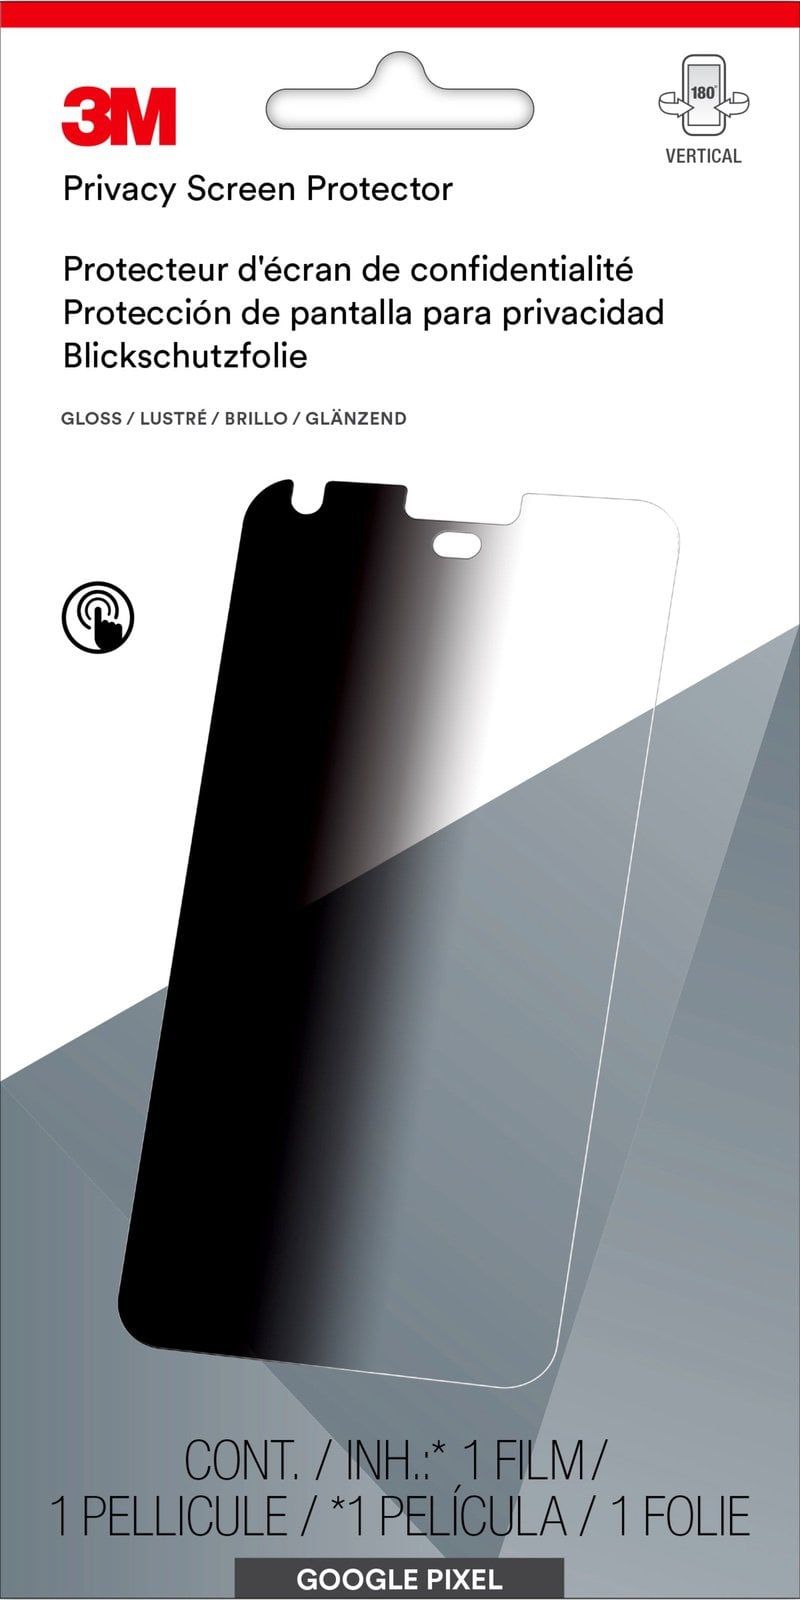 3M™ Privacy Screen Protector for Google™ Pixel Phone, MPPGG003